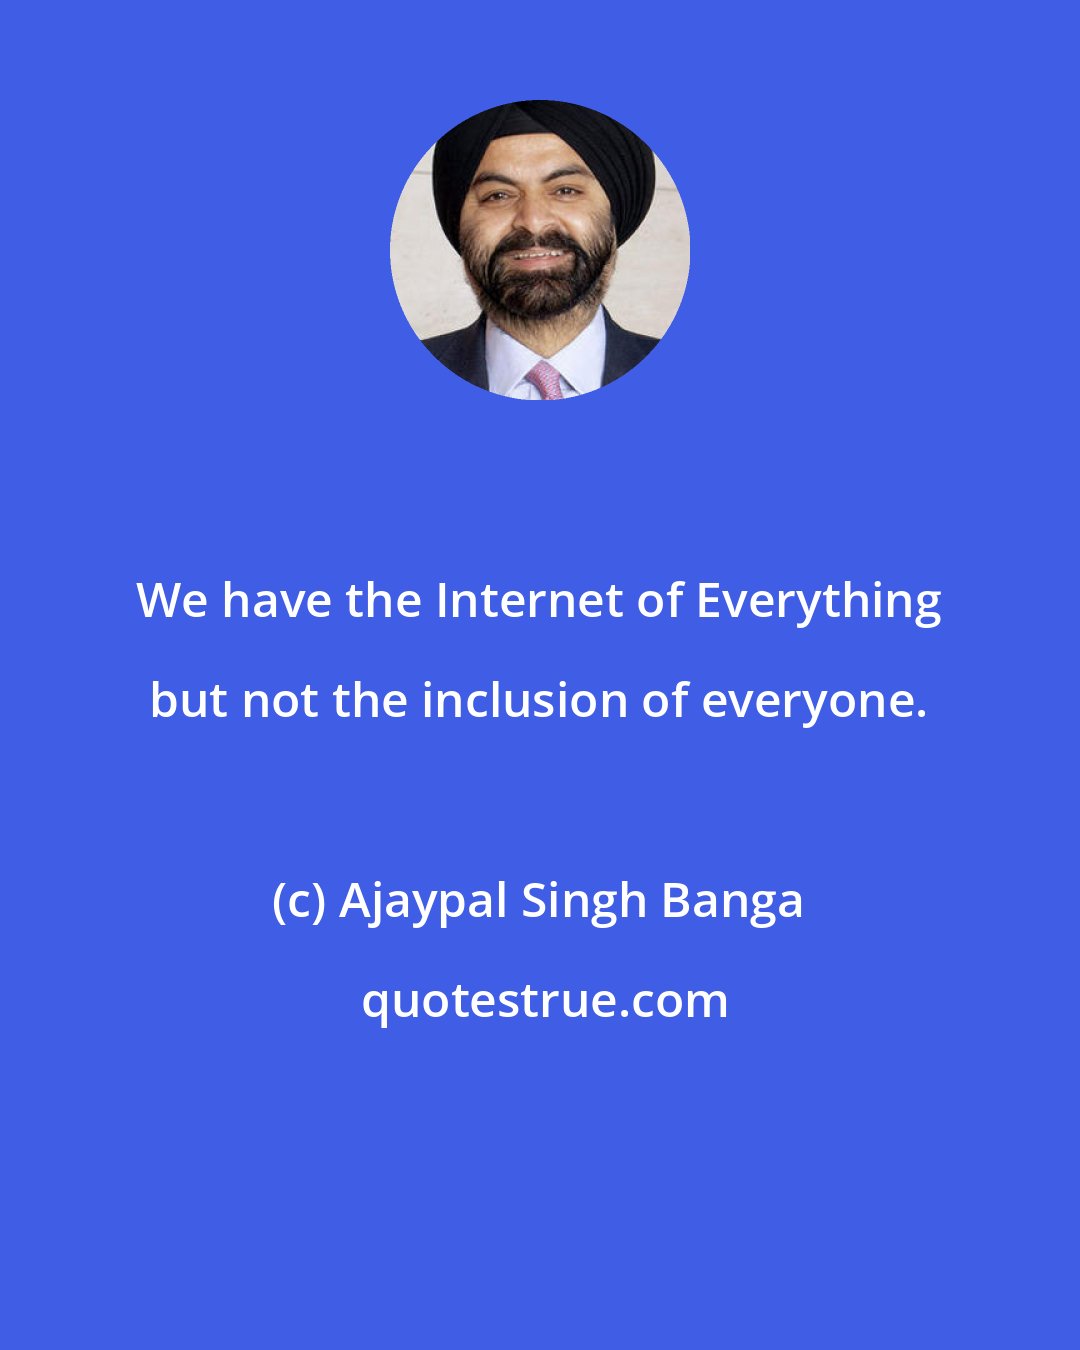 Ajaypal Singh Banga: We have the Internet of Everything but not the inclusion of everyone.